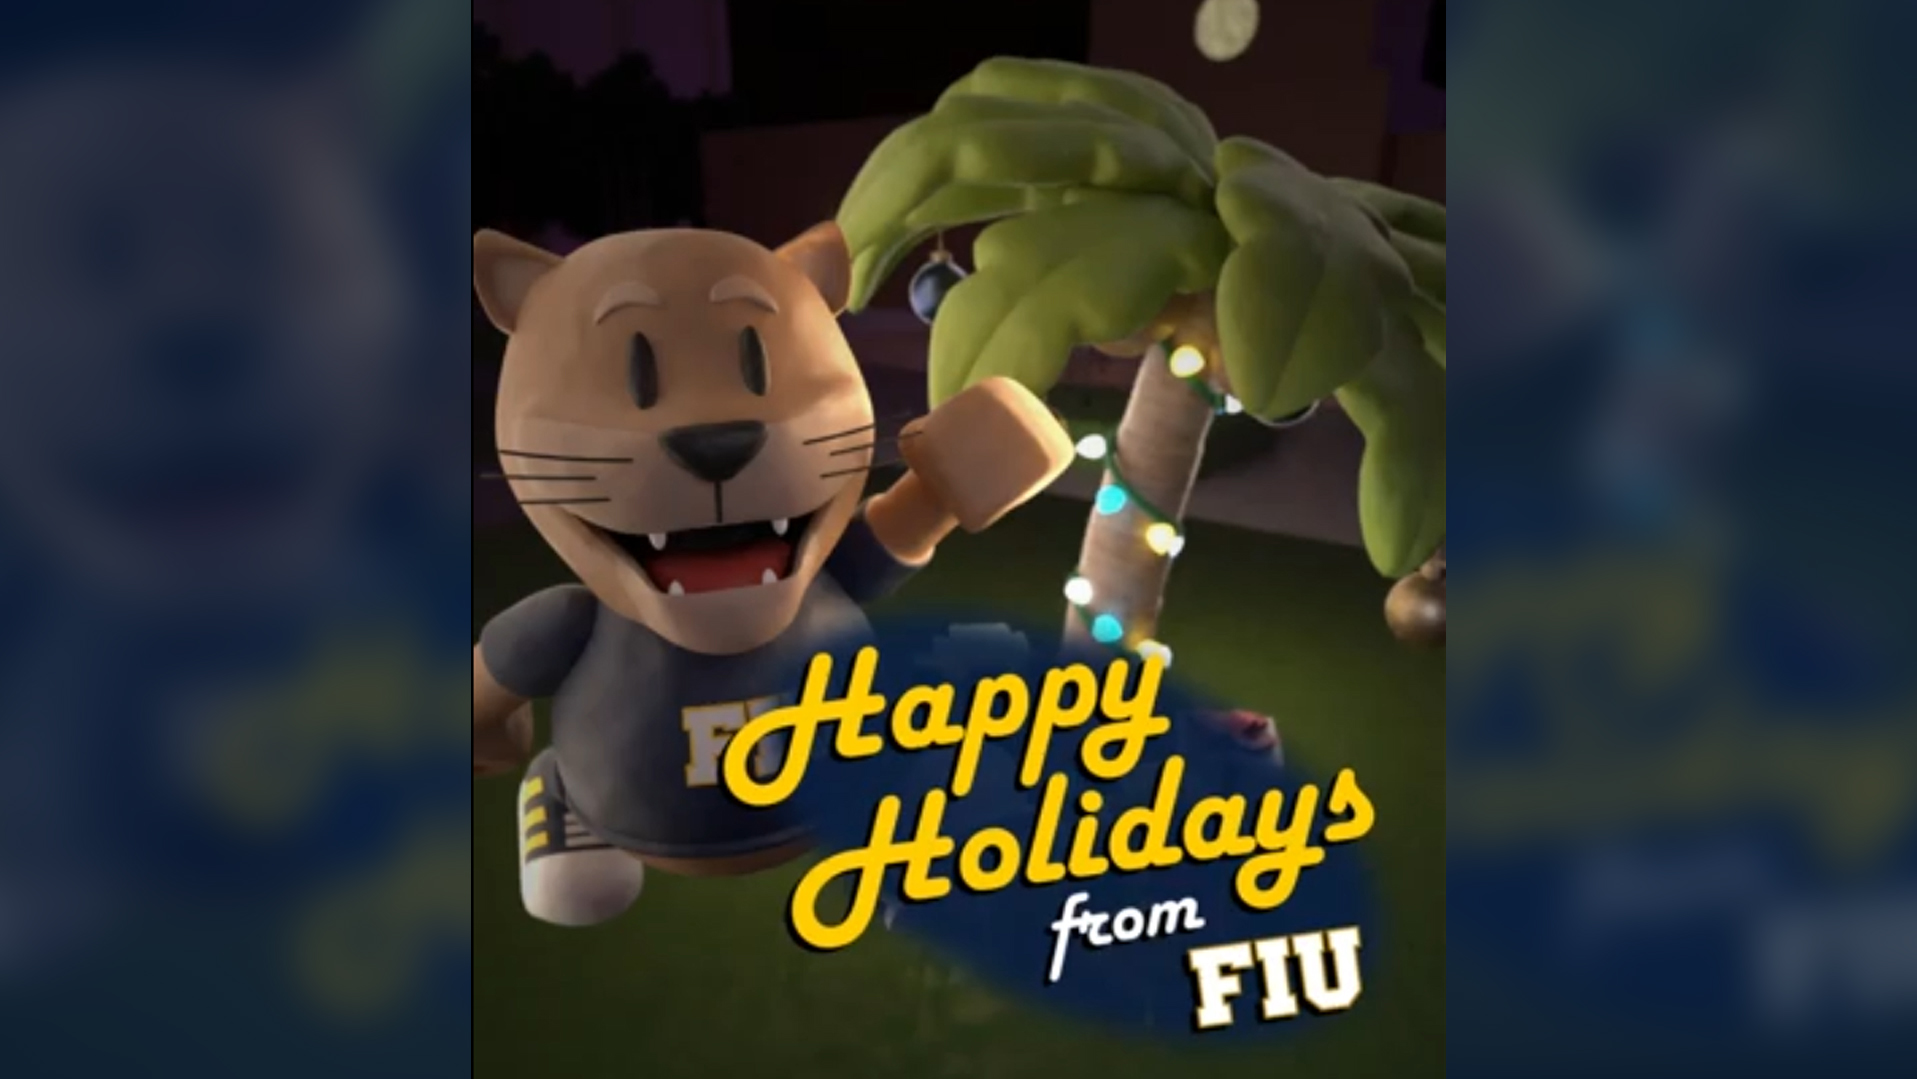 a snapshot of the FIU holiday cartoon from 2022